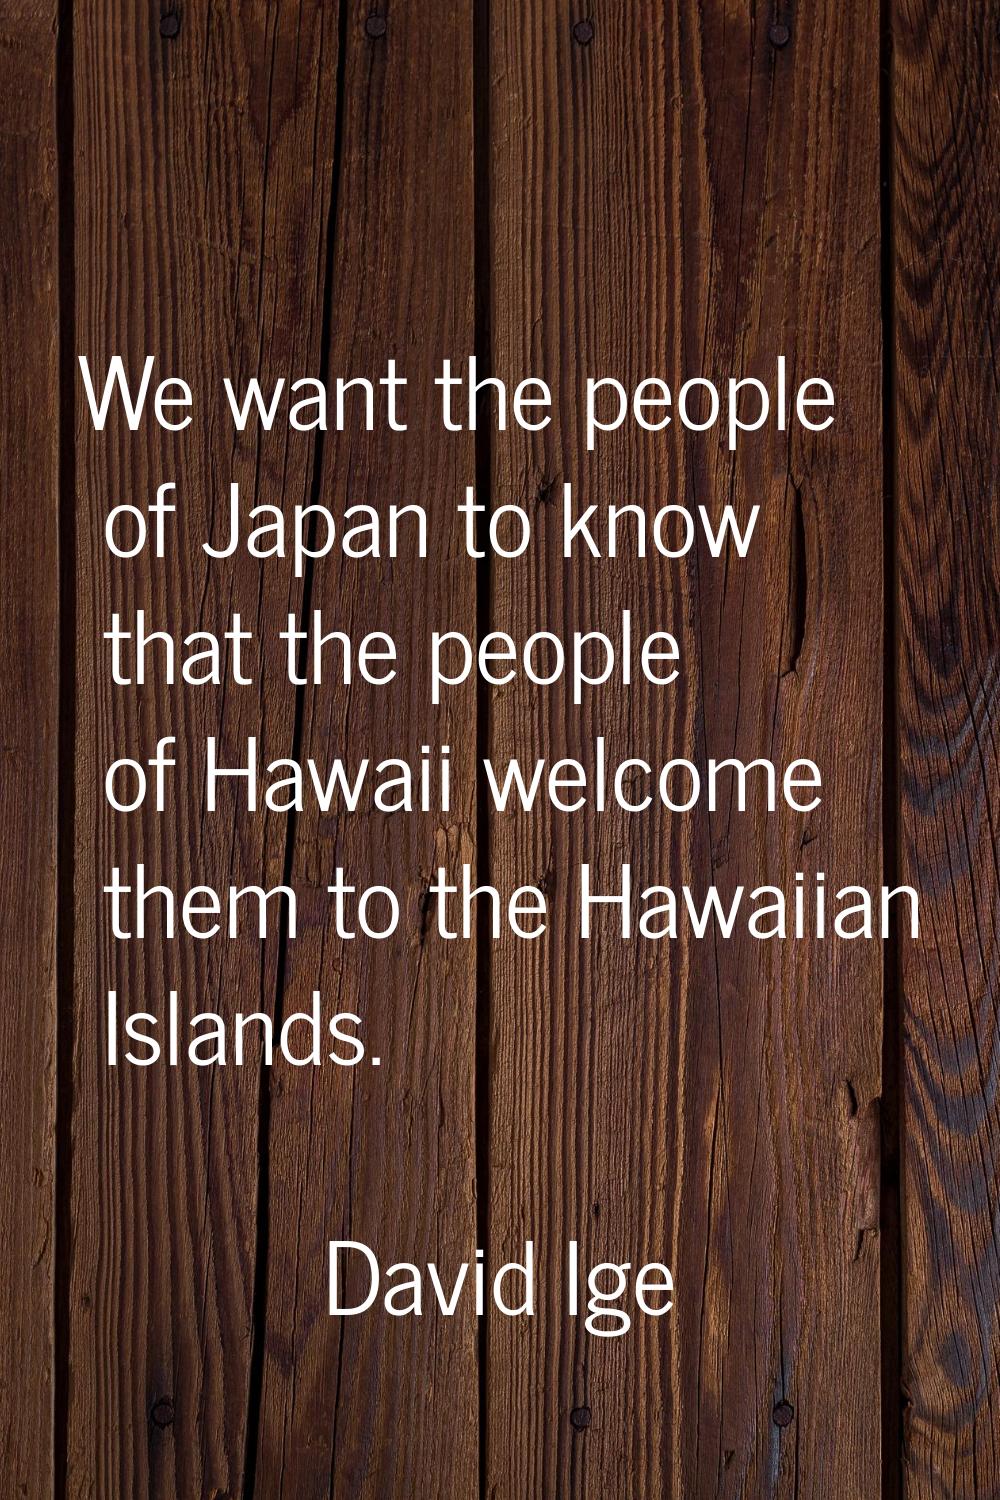 We want the people of Japan to know that the people of Hawaii welcome them to the Hawaiian Islands.